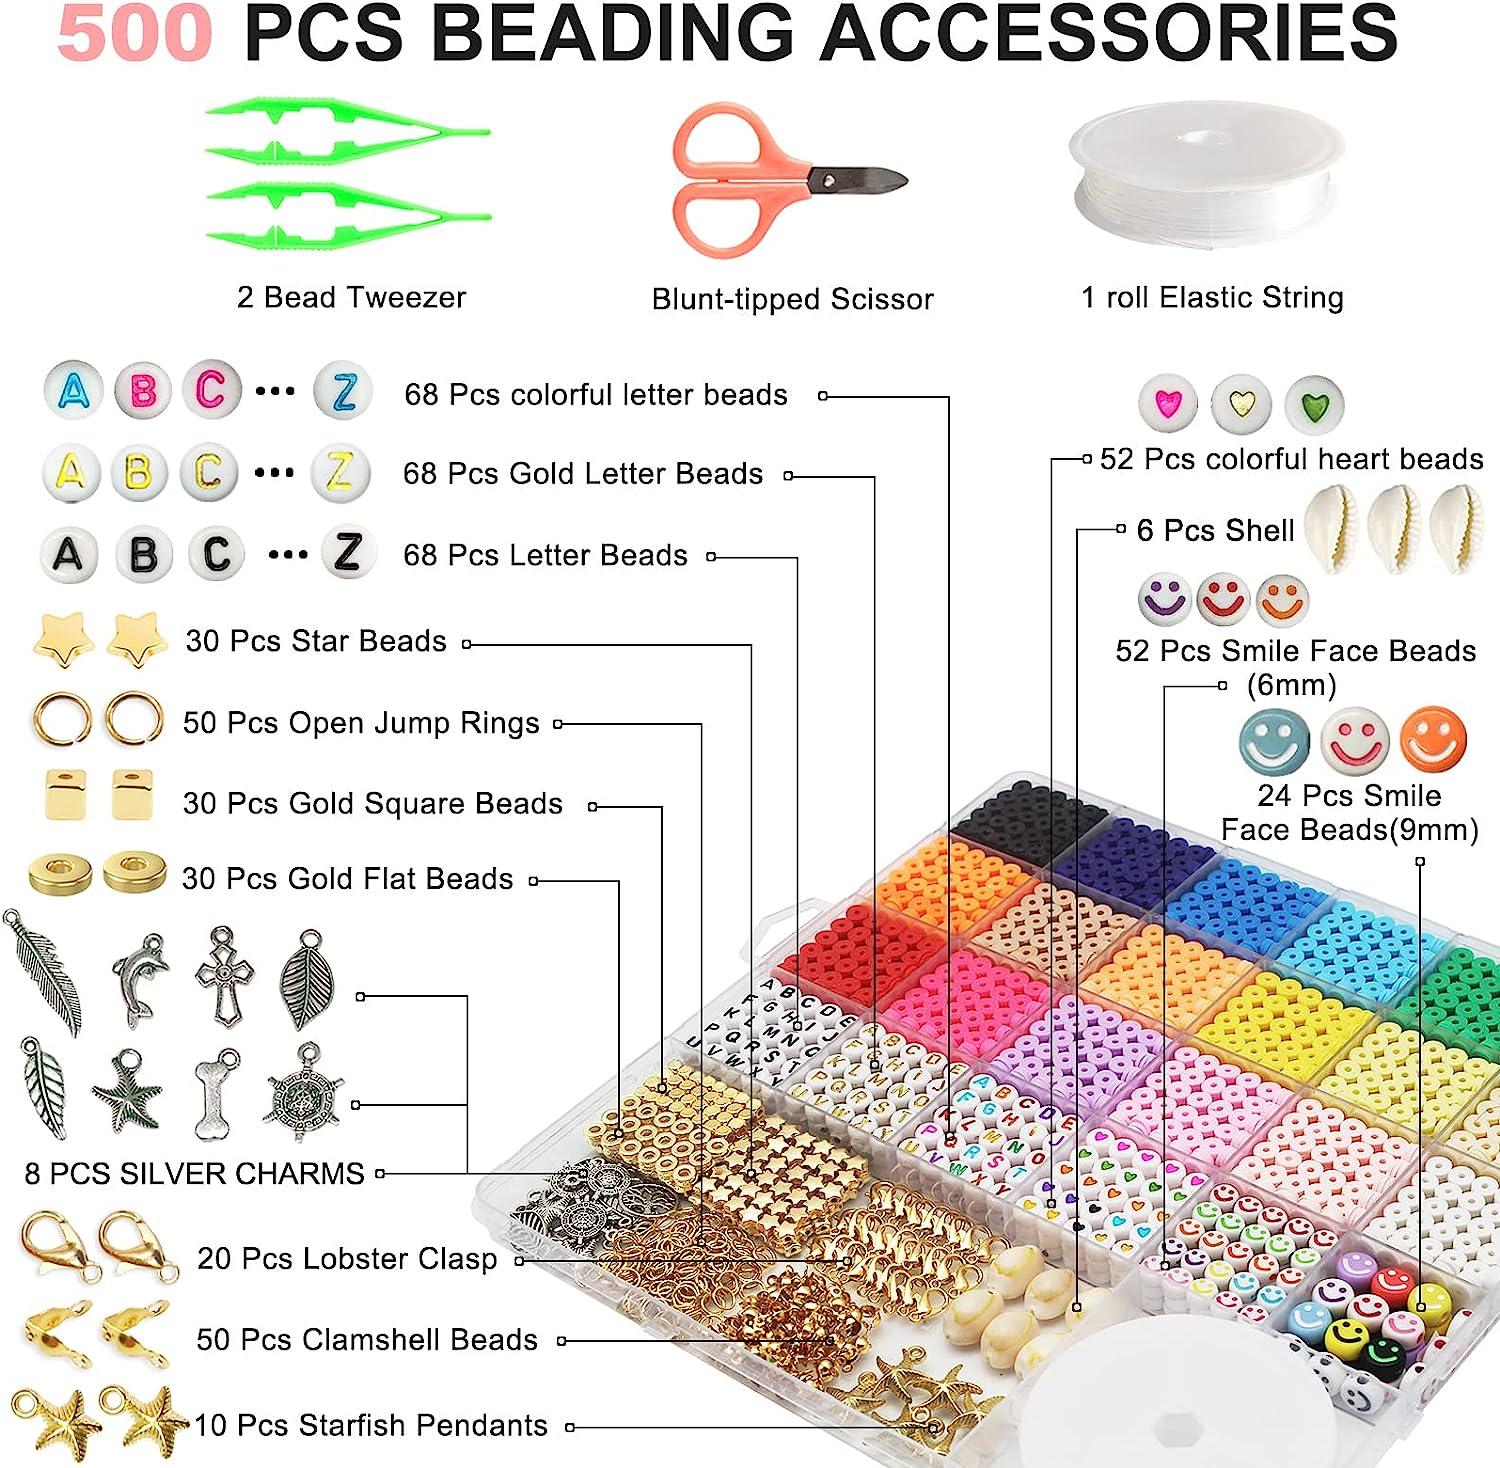 Redtwo 7200 Pcs Clay Beads Bracelet Making Kit, Preppy Friendship Flat  Polymer Heishi Beads Jewelry Kits with Charms and Elastic Strings,Crafts  Gifts